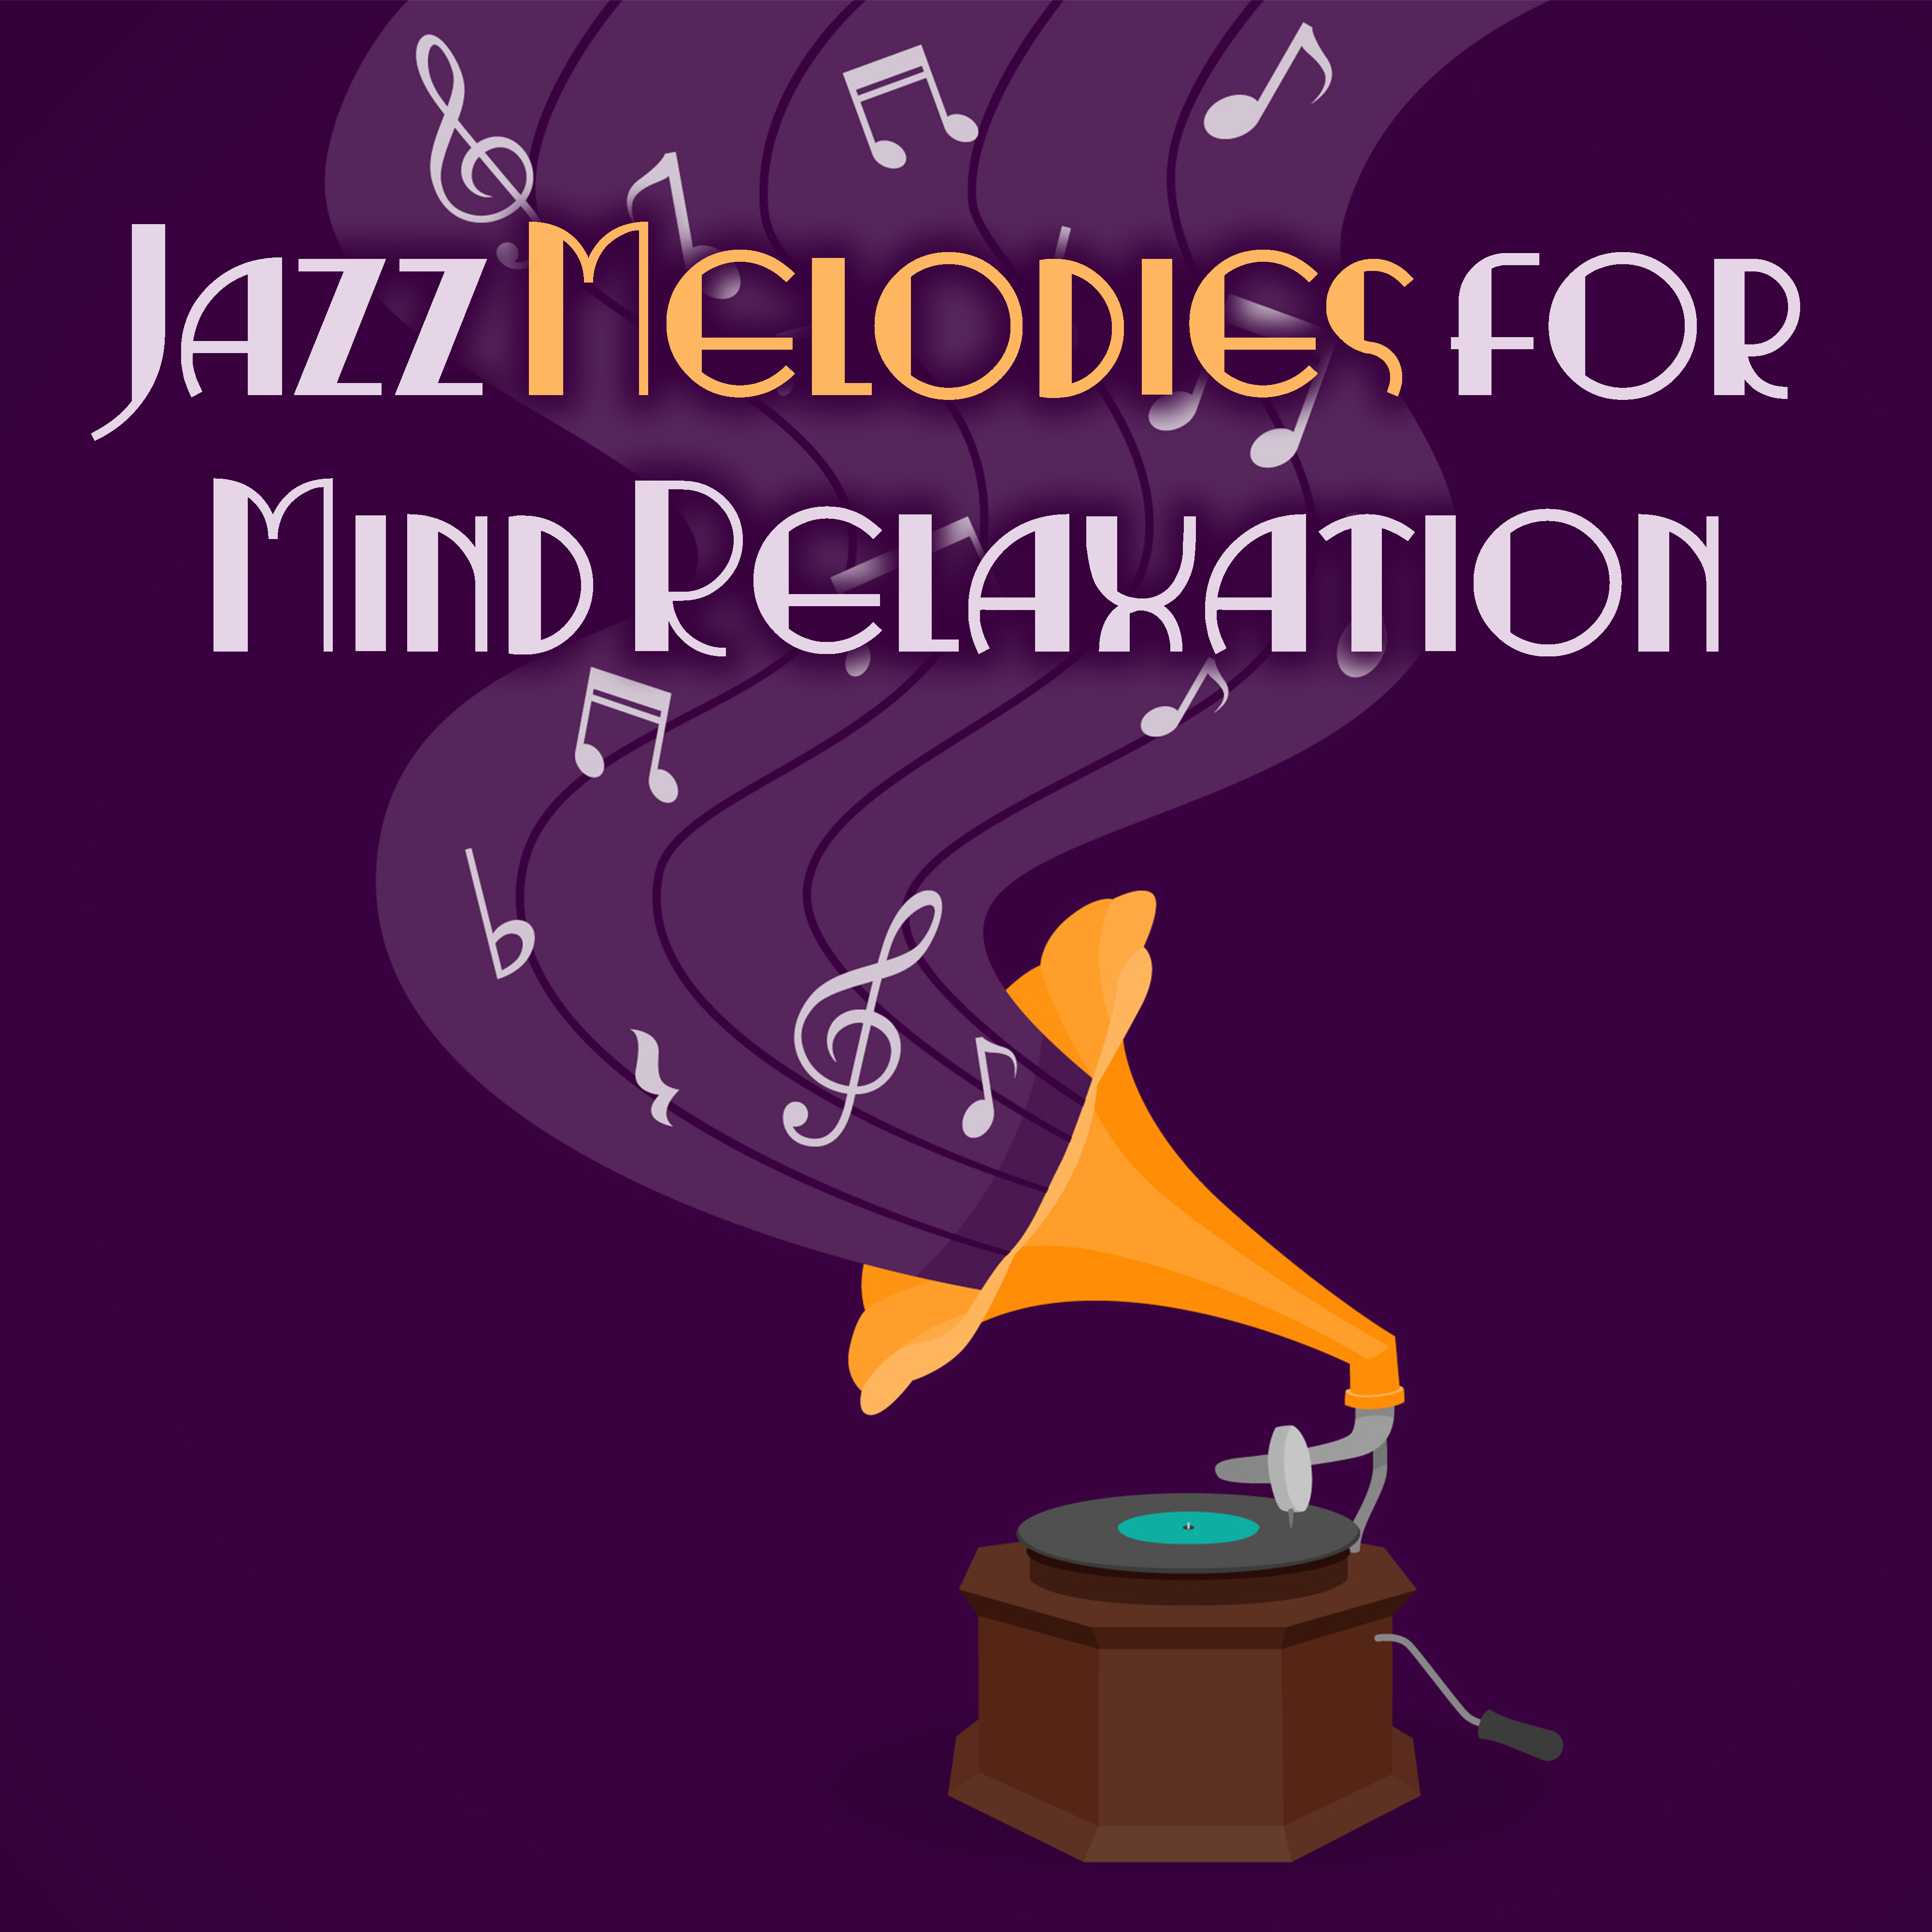 Jazz Melodies for Mind Relaxation